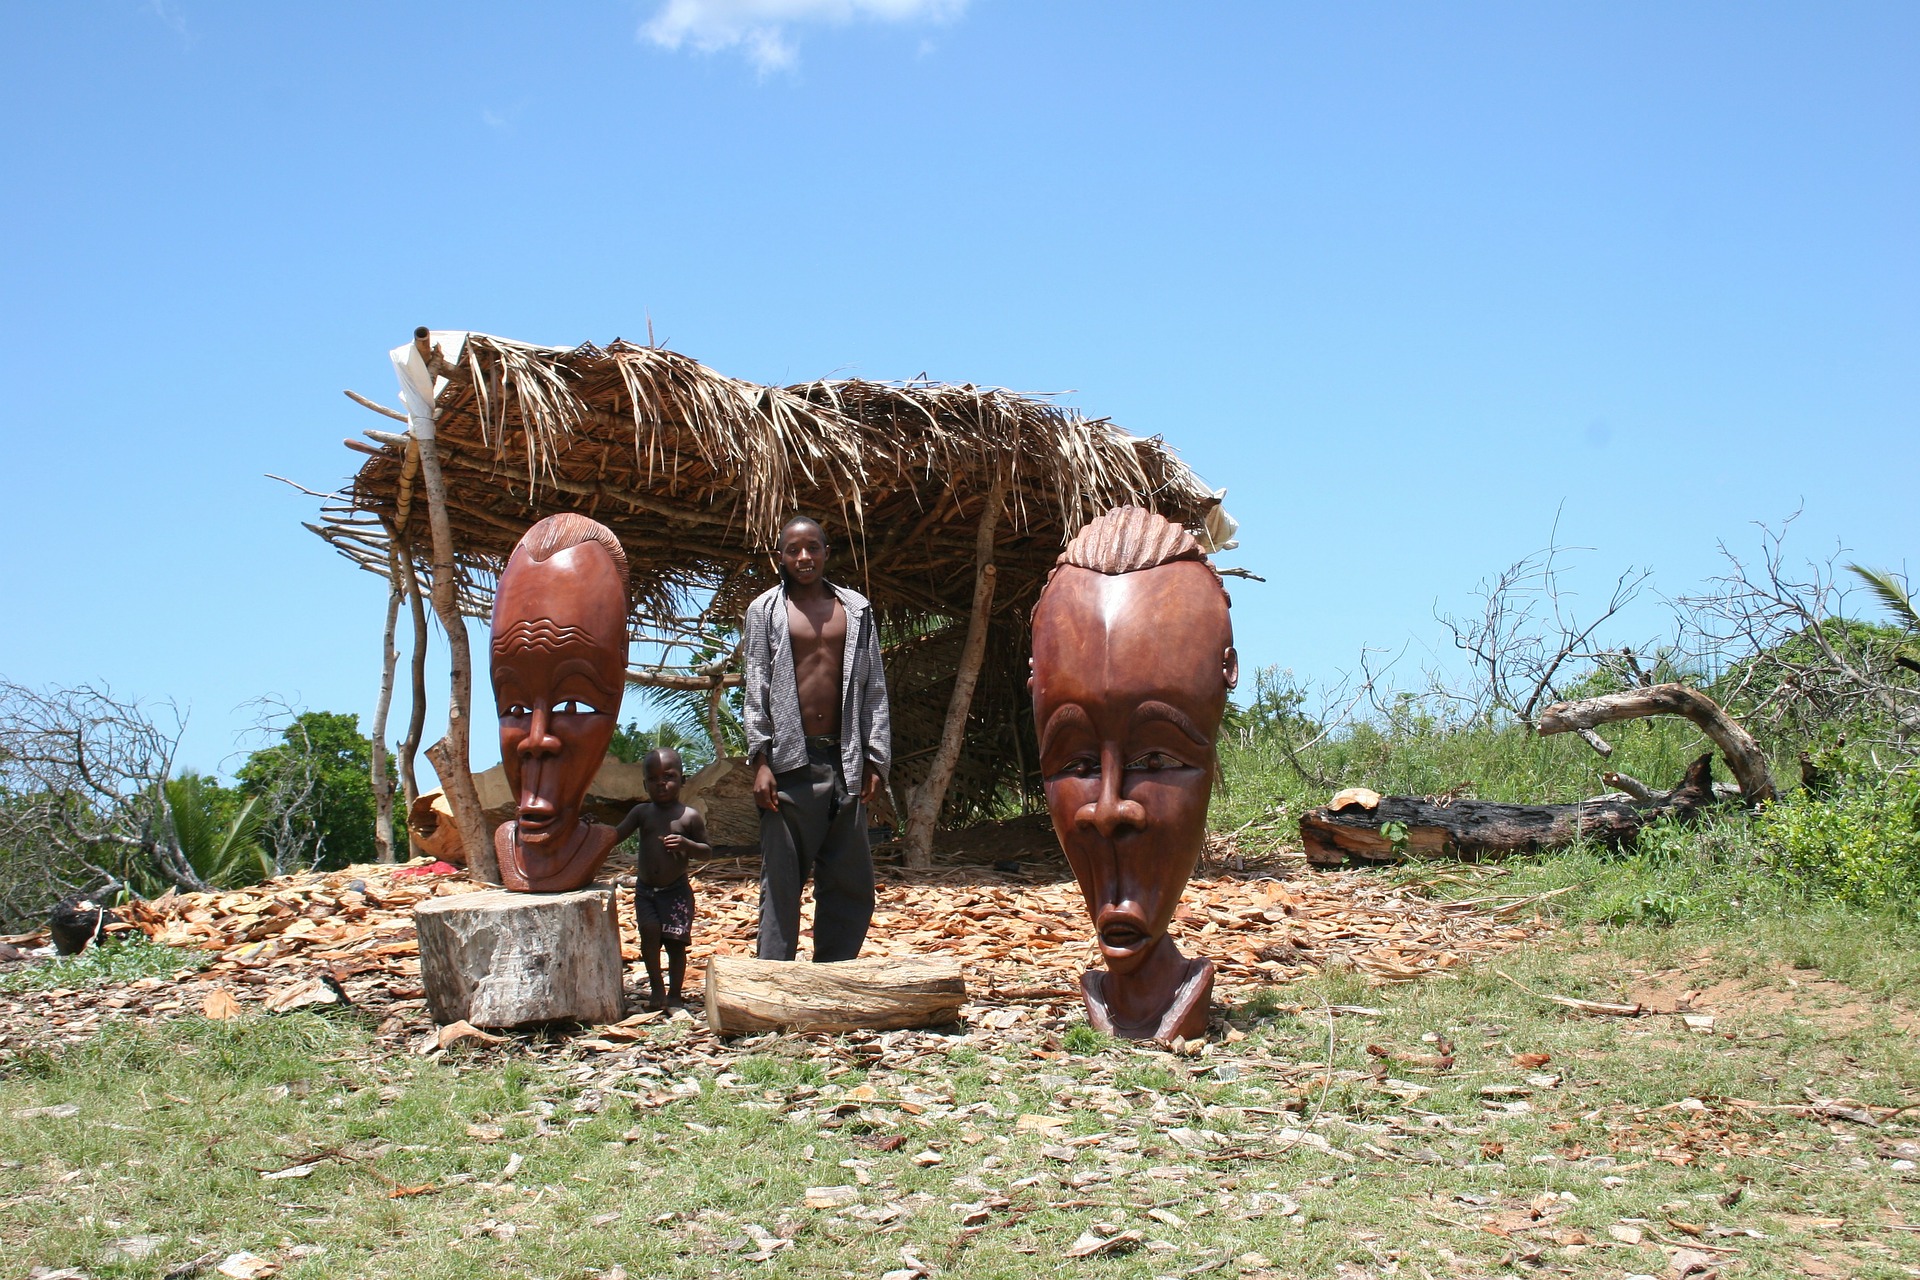 person stands between two large wooden sculptures in Mozambique